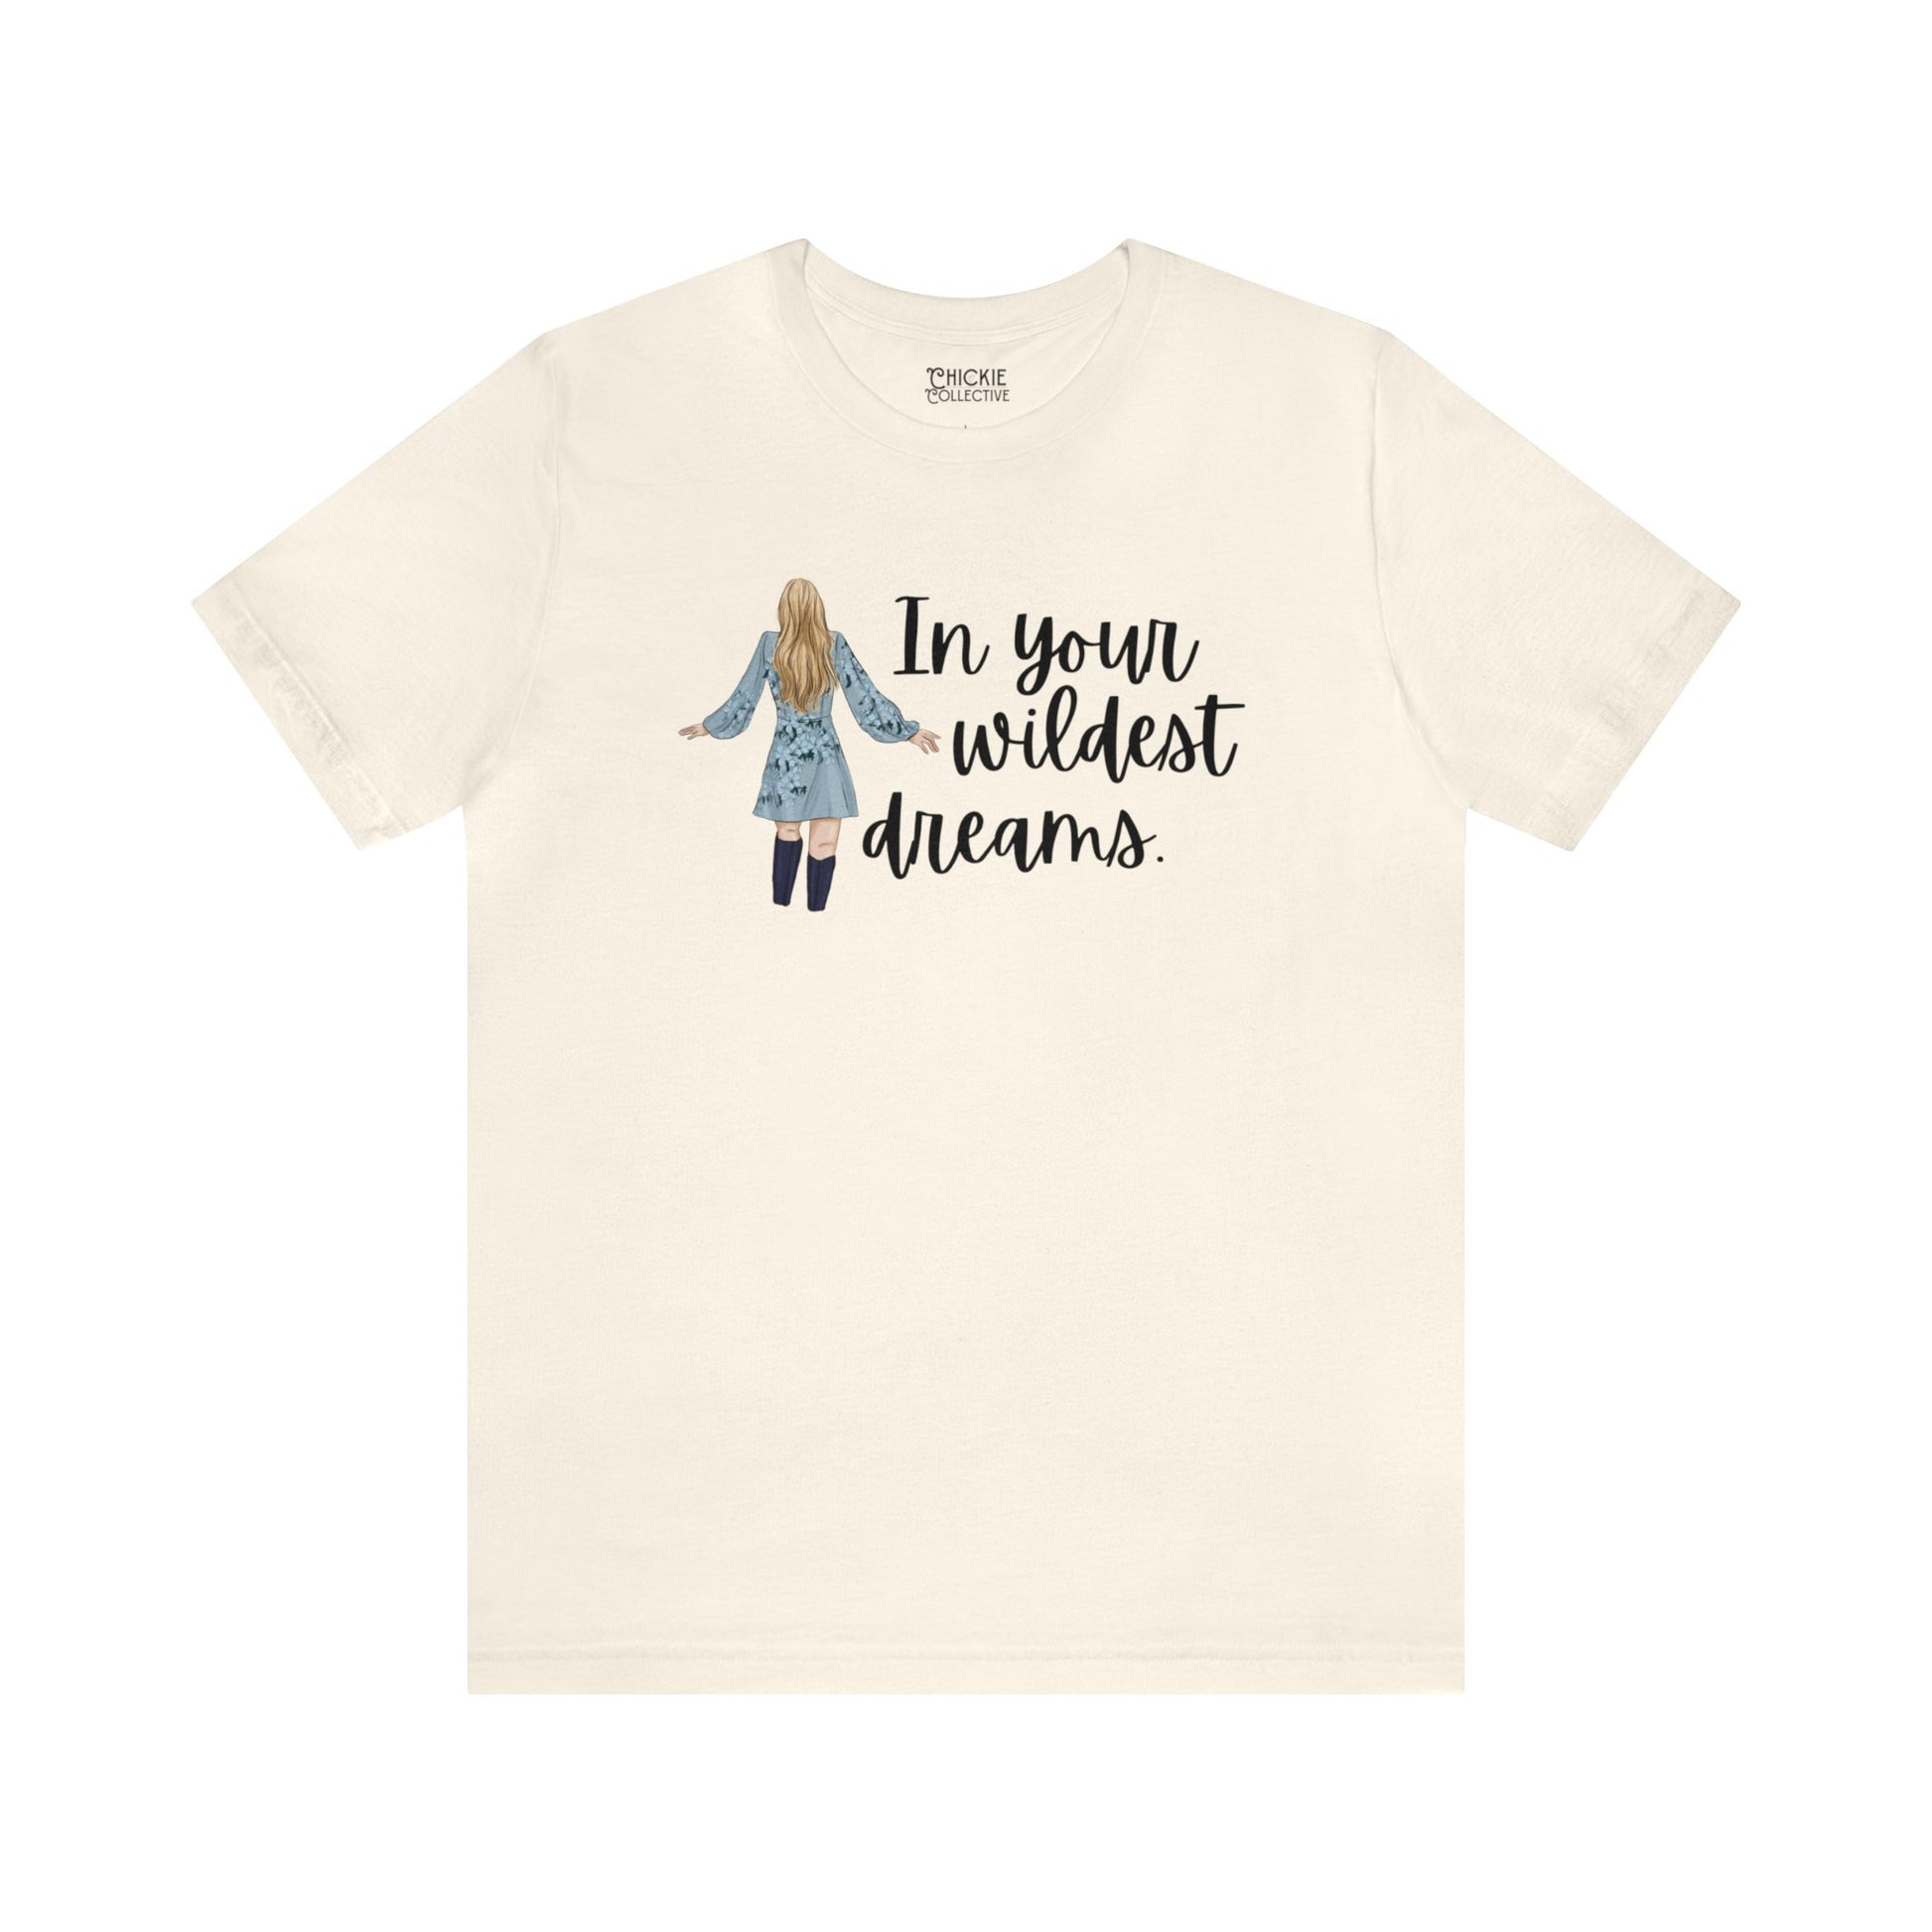 Taylor Swift Preppy Picture T-Shirt - In Your Wildest Dreams T-Shirt Natural S  - Chickie Collective